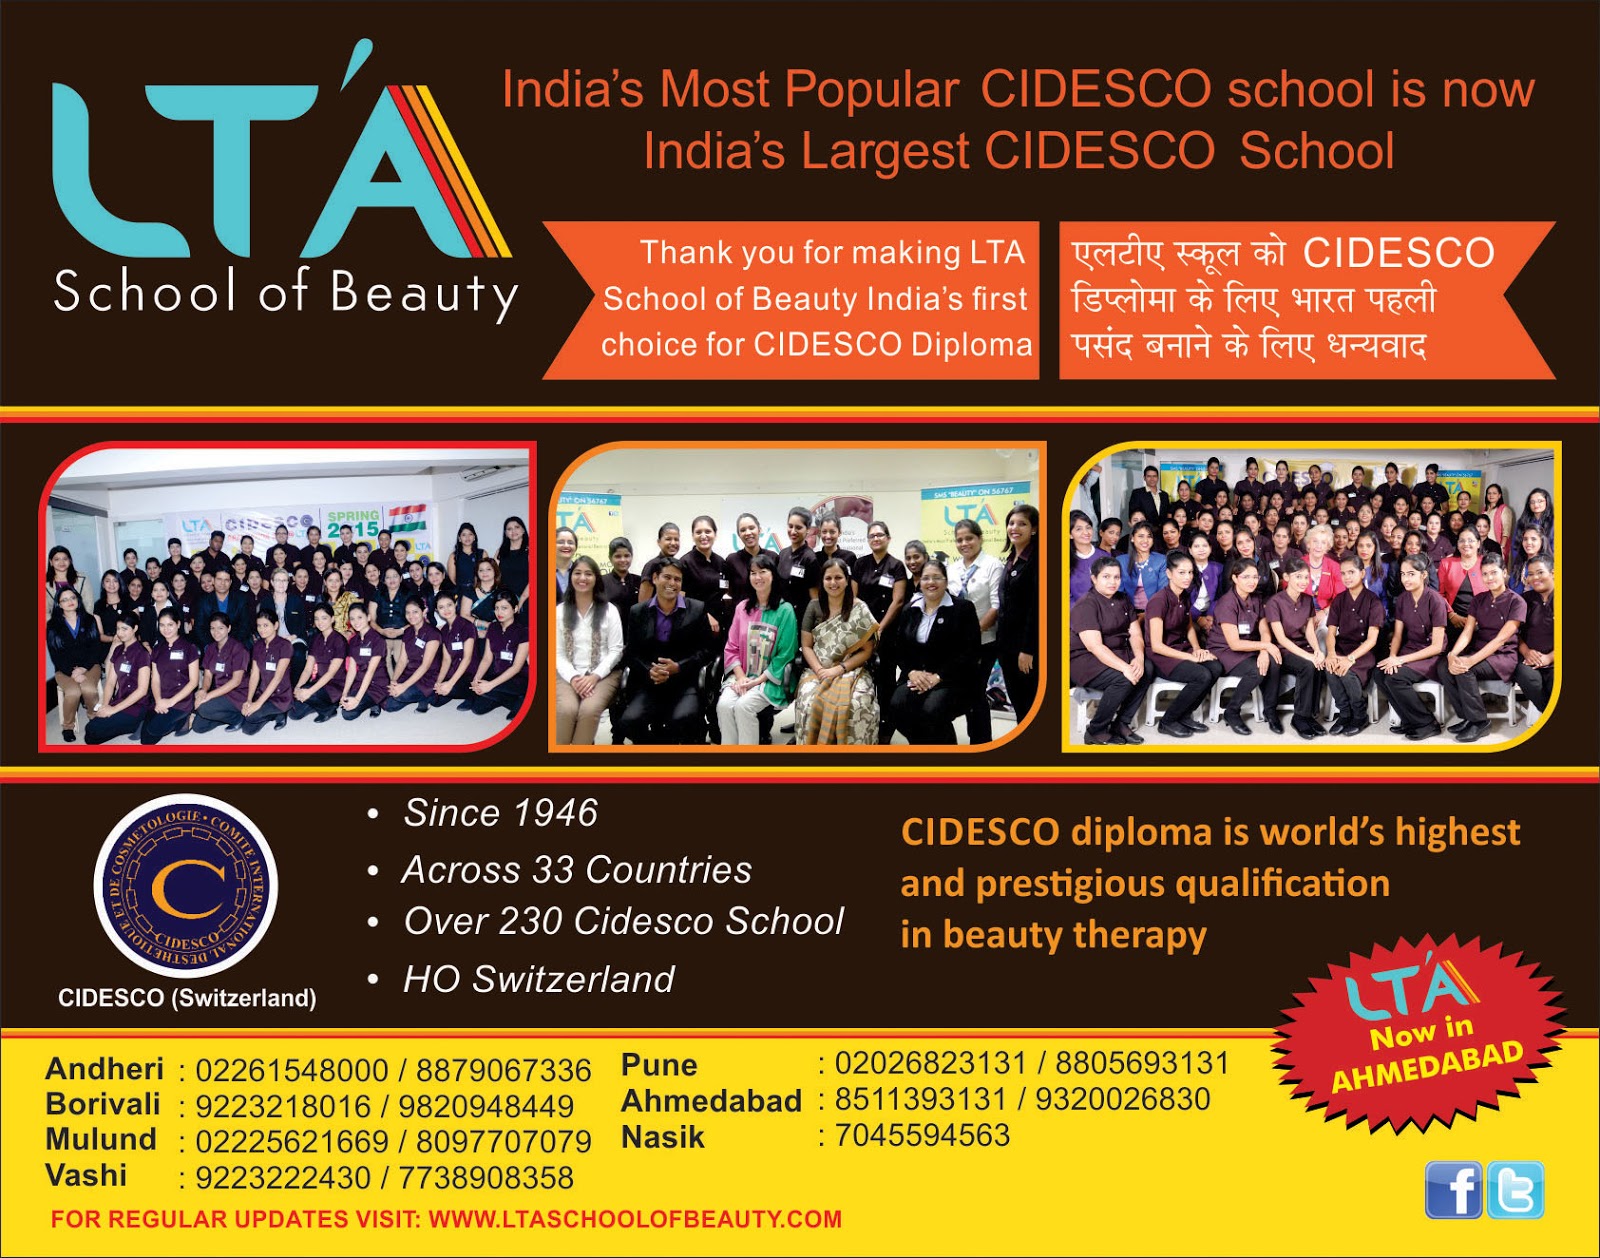 101 Reasons to SMILE - LTA School of Beauty churned out 101 CIDESCO  Graduates in industry in 2015